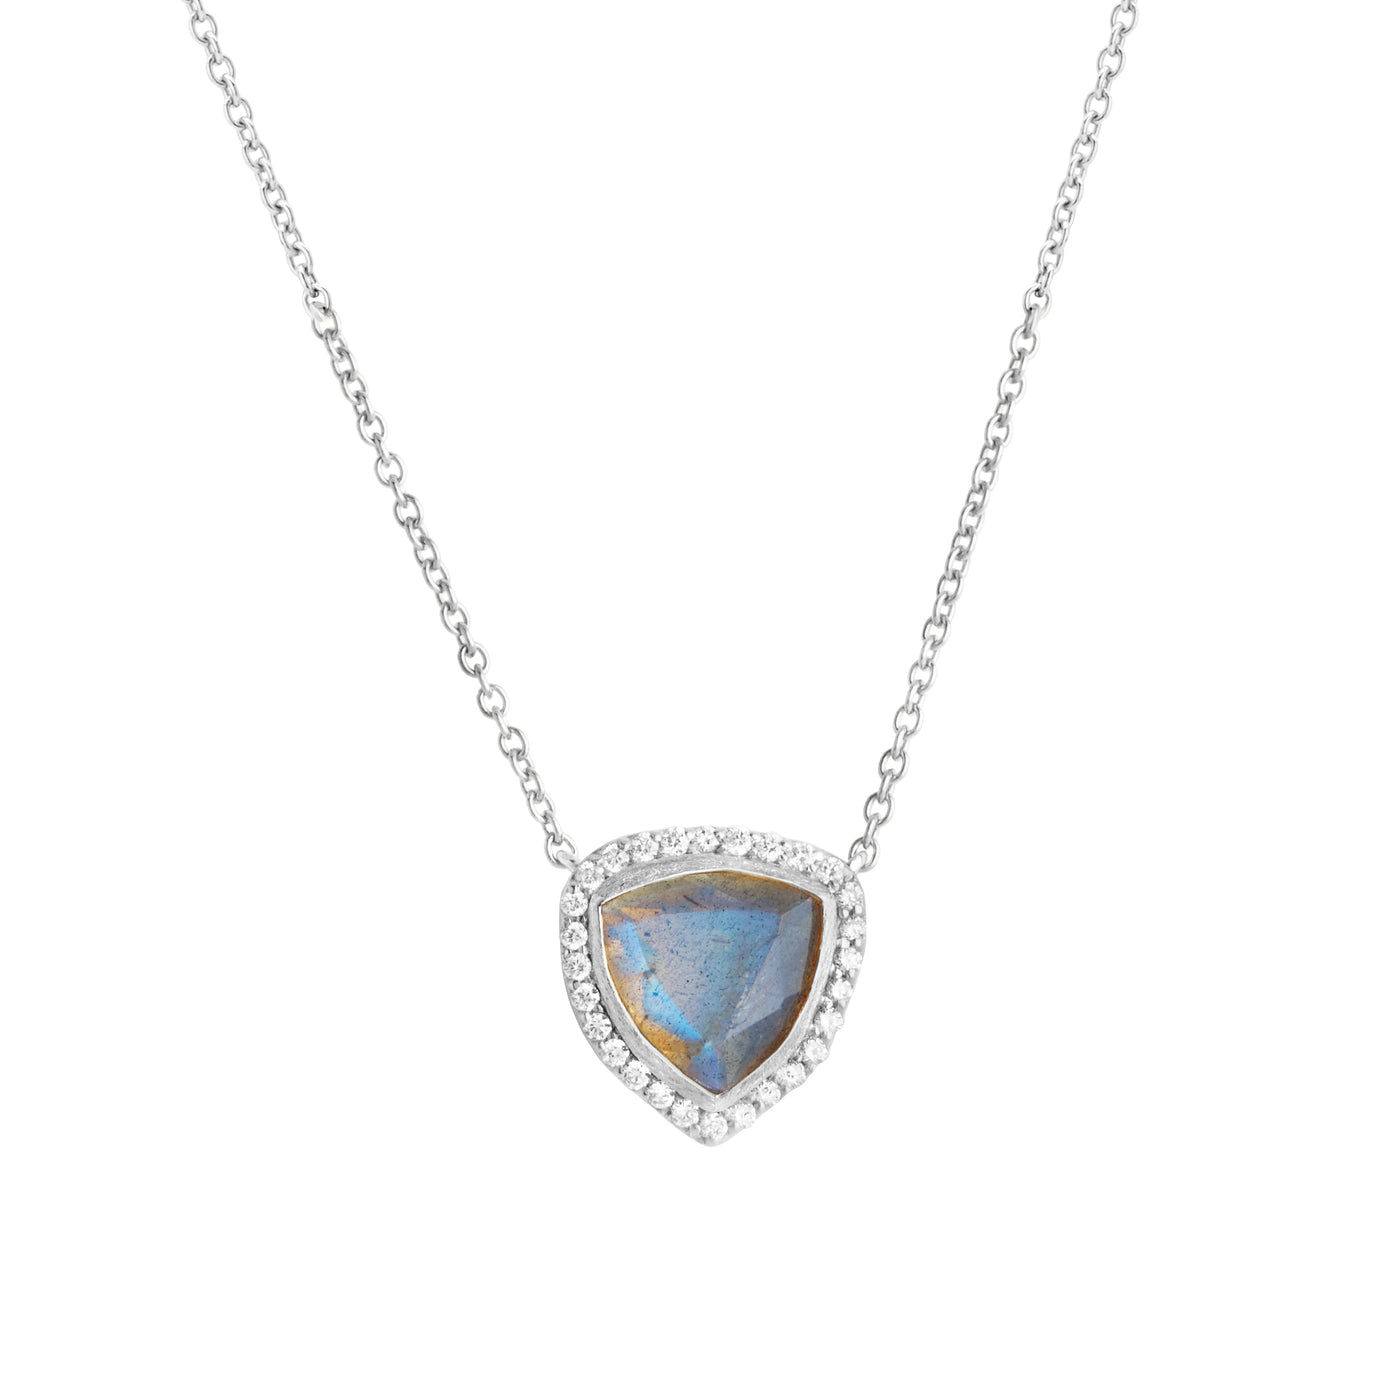 14 Karat White Gold Necklace with Triangle Shaped Labradorite with Halo of White Diamonds Against White Background